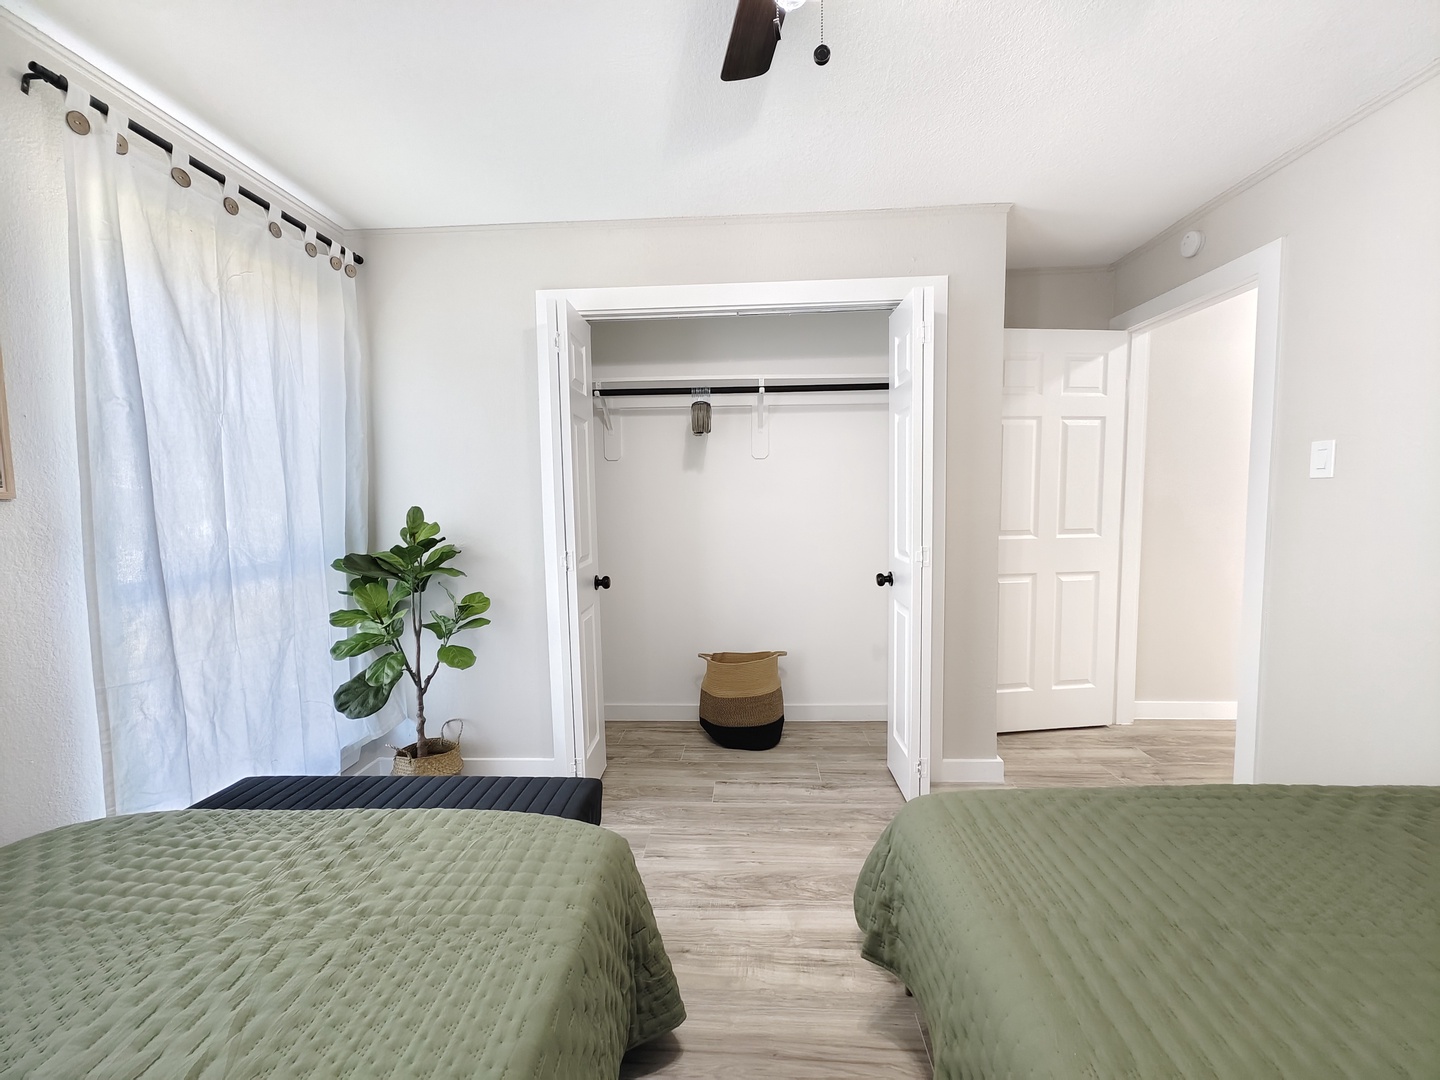 The second bedroom sanctuary features a pair of cozy queen beds